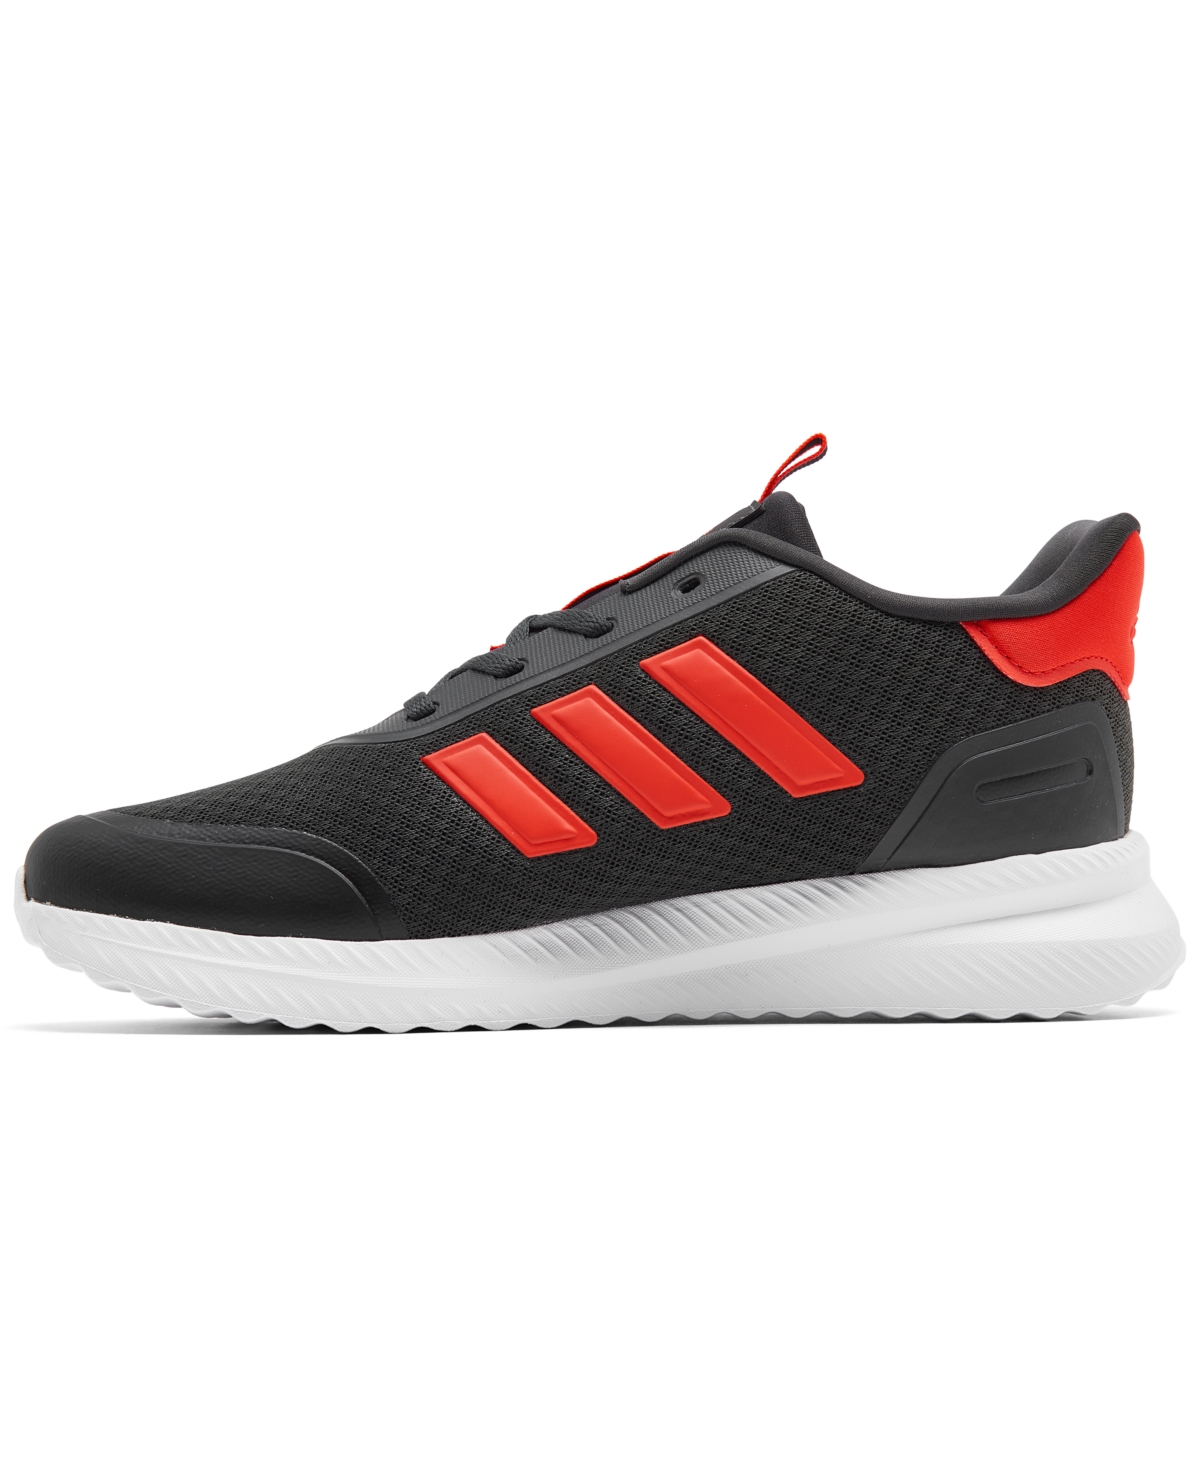 Shop Adidas Originals Originals Big Kids Xplr Casual Sneakers From Finish Line In Carbon,bright Red,cloud White